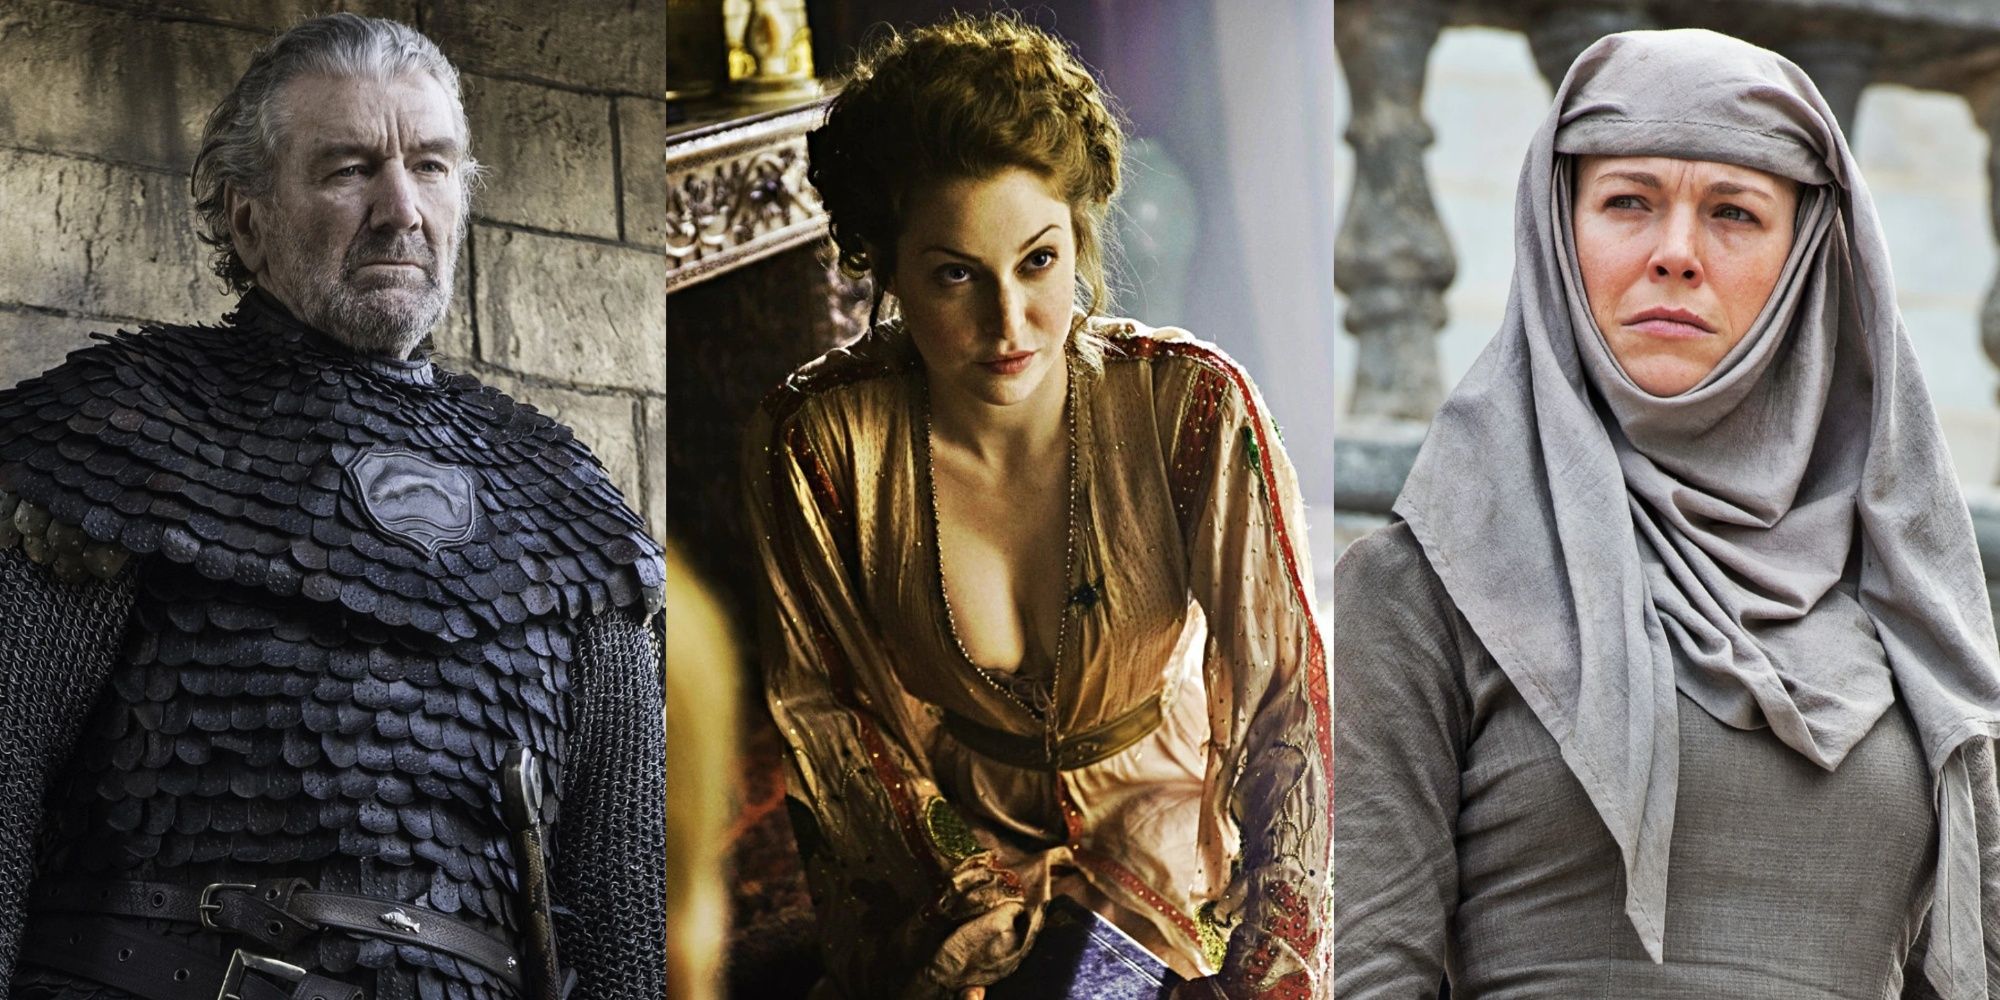 Blackfish, Ros and Unella in Game of Thrones